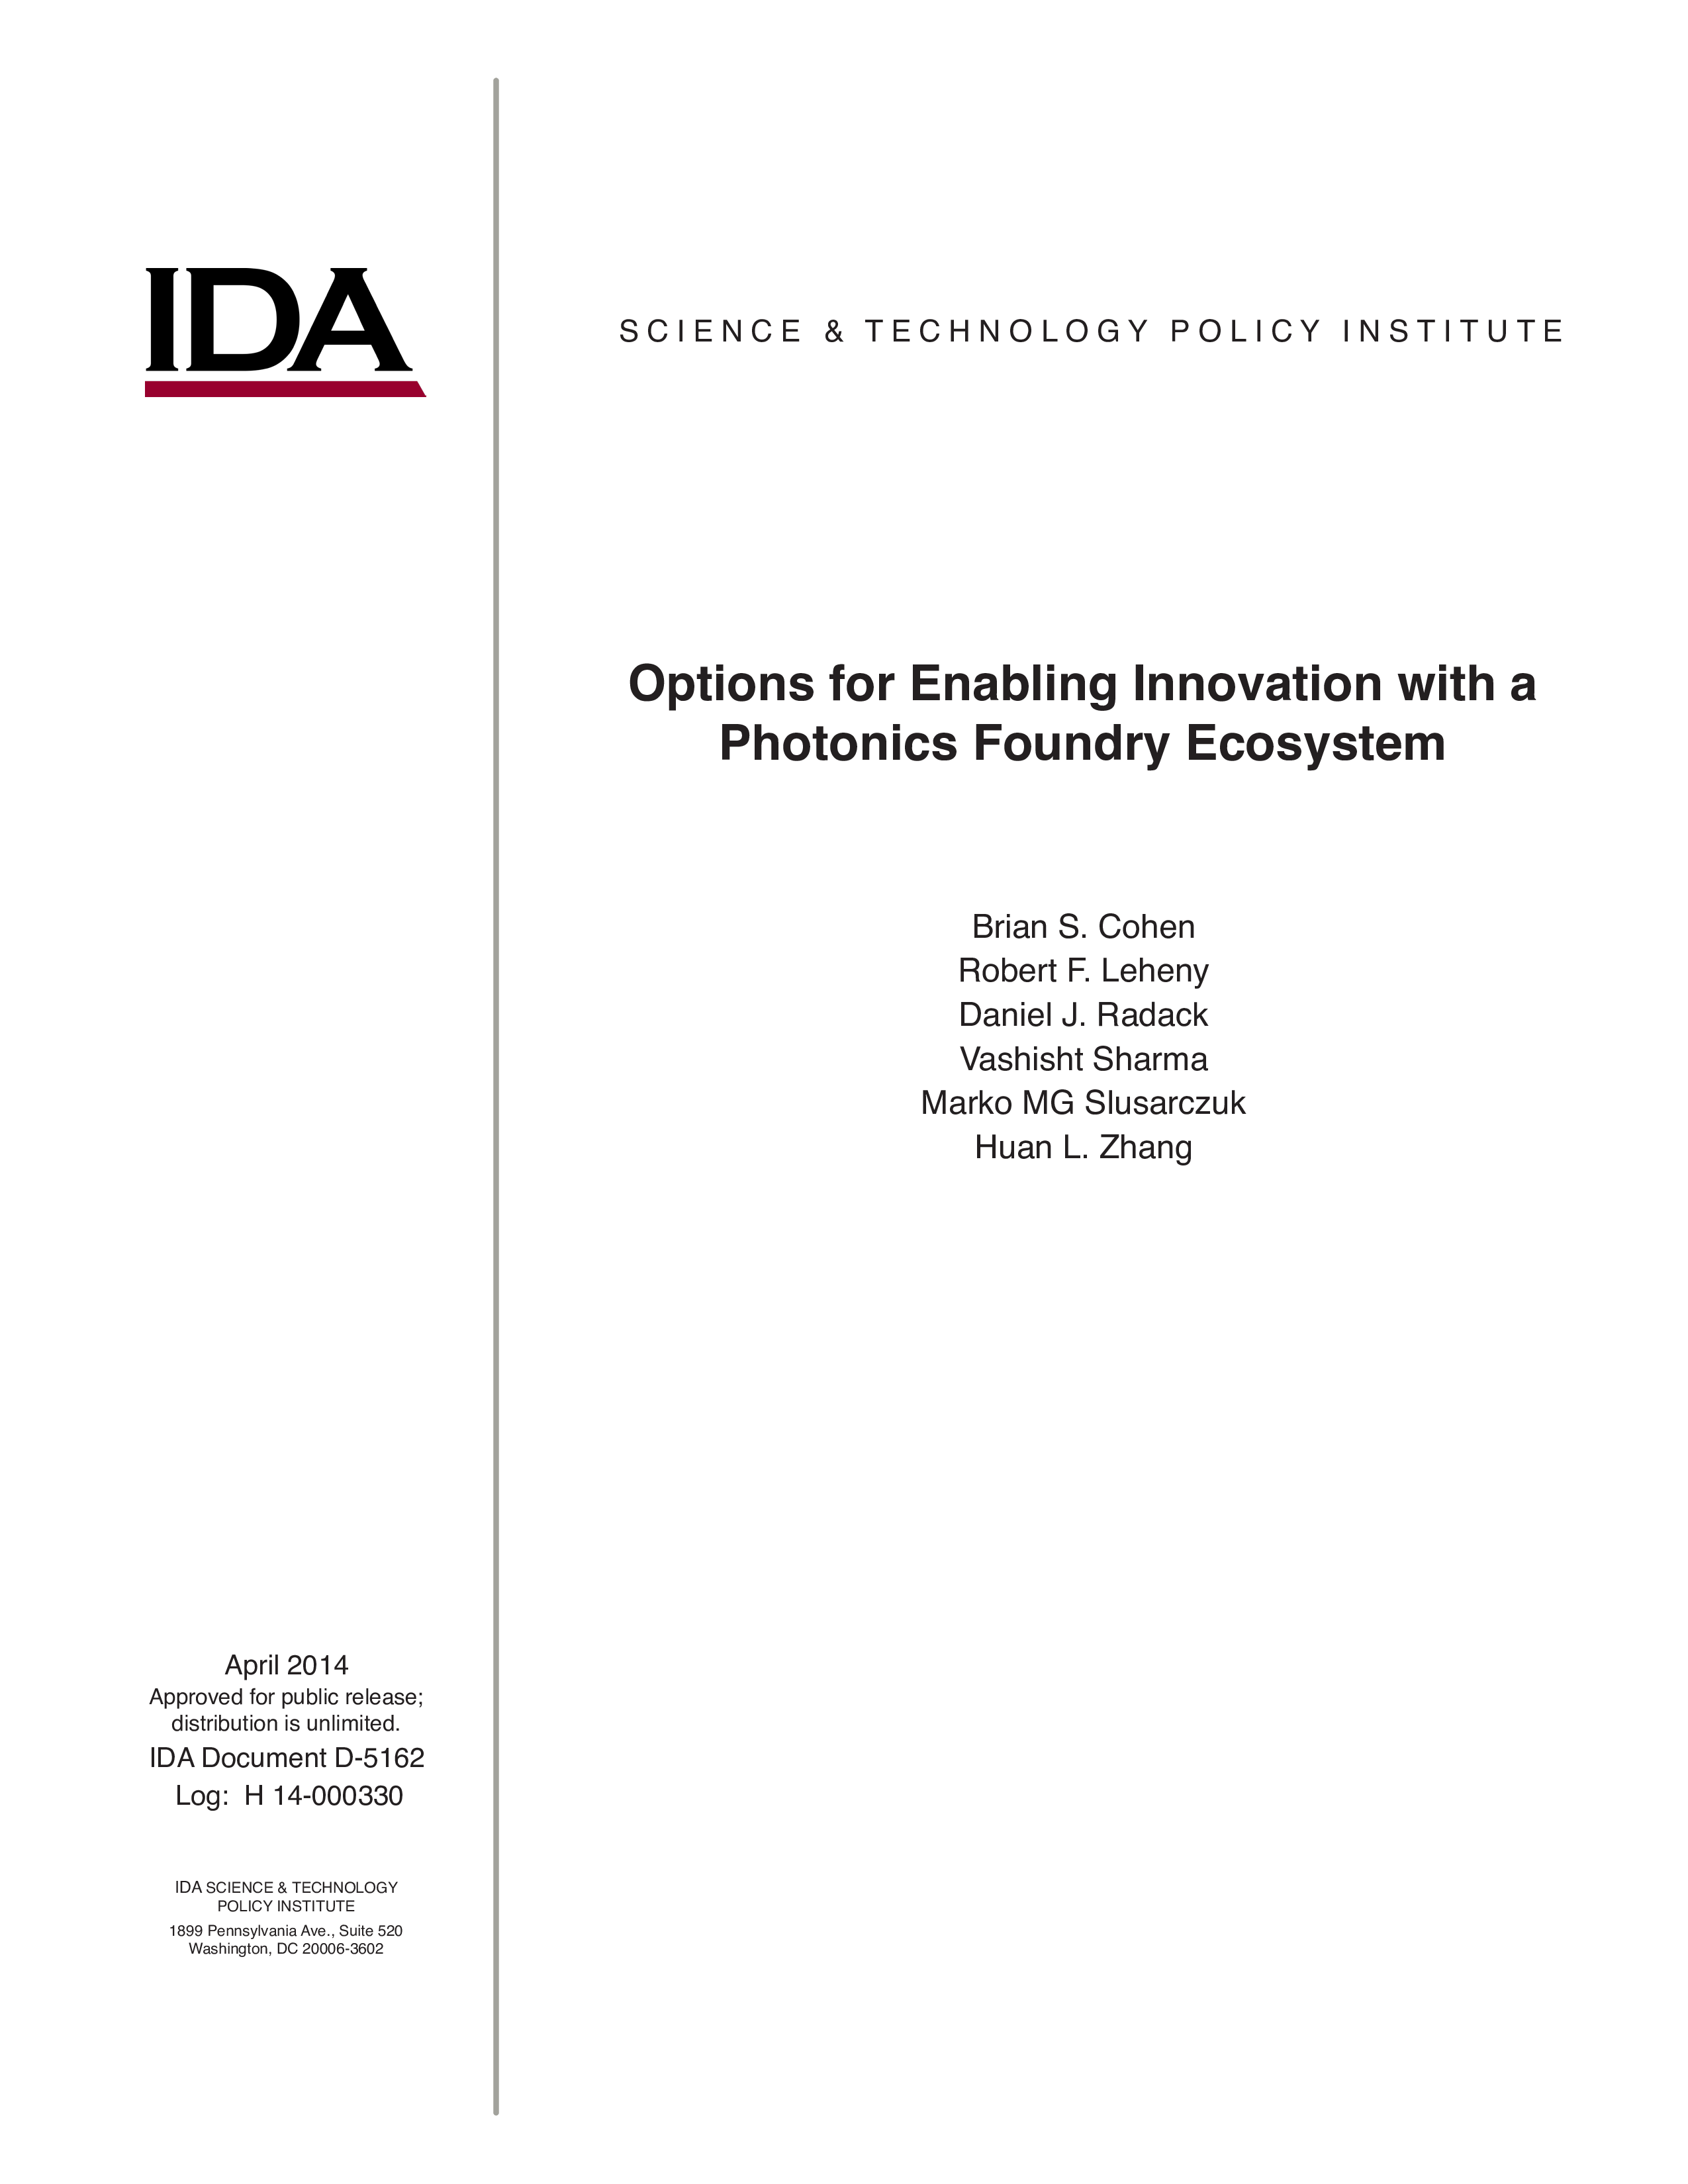 Options for Enabling Innovation with a Photonics Foundry Ecosystem